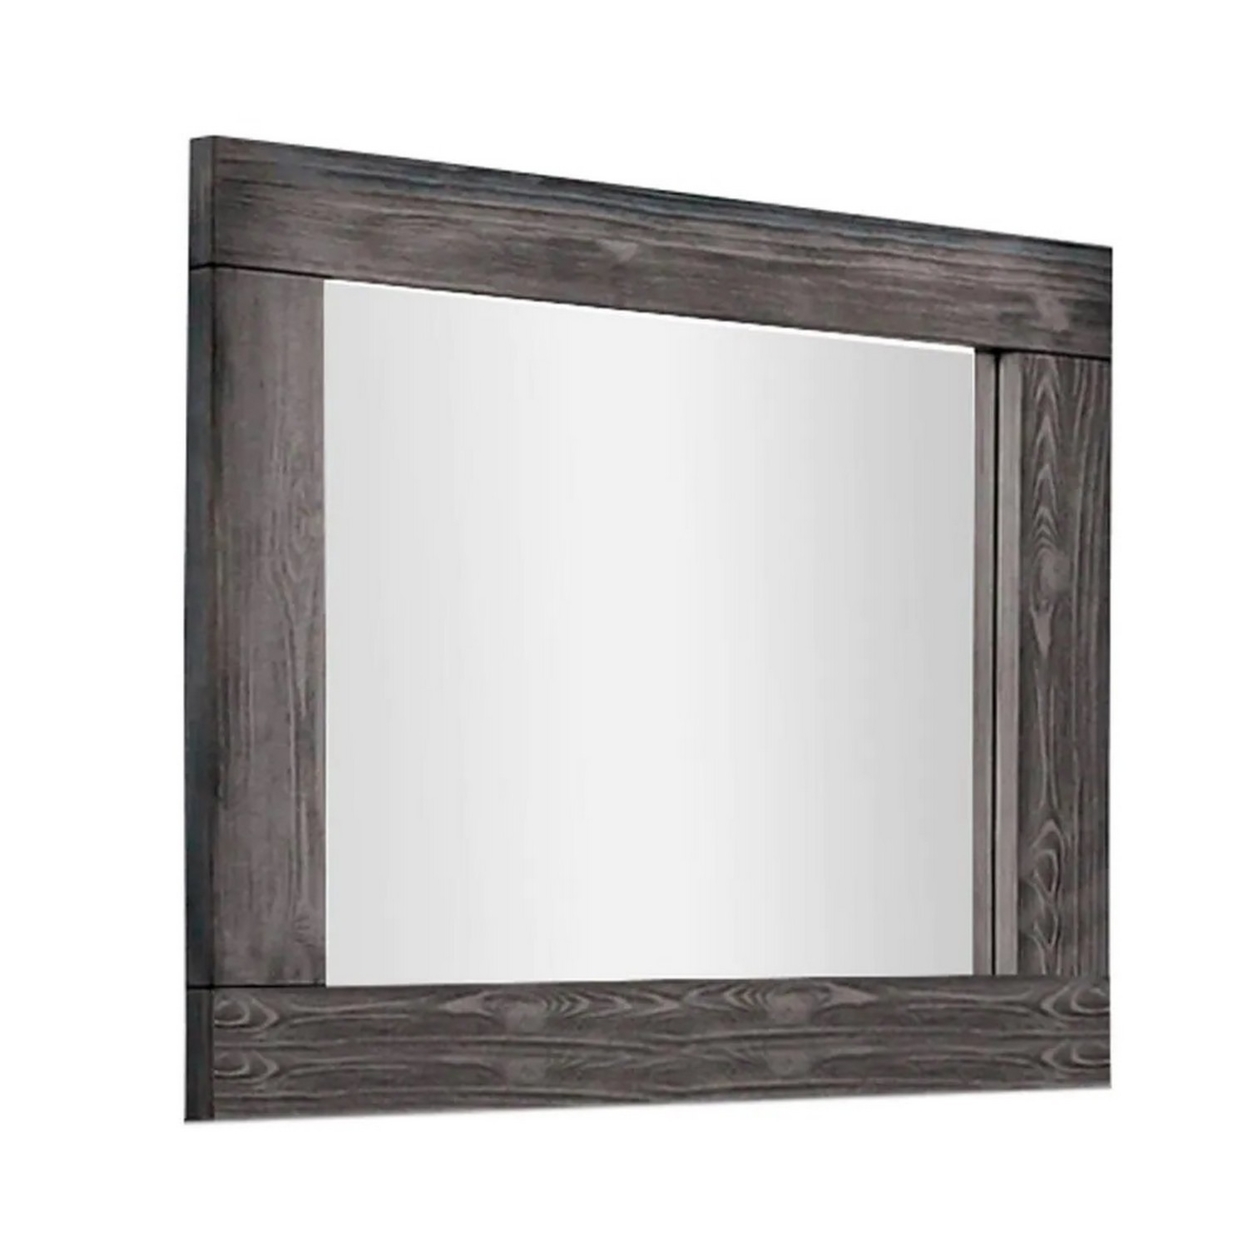 Mirror With Grain Details And Broad Wood Frame, Rustic Gray- Saltoro Sherpi